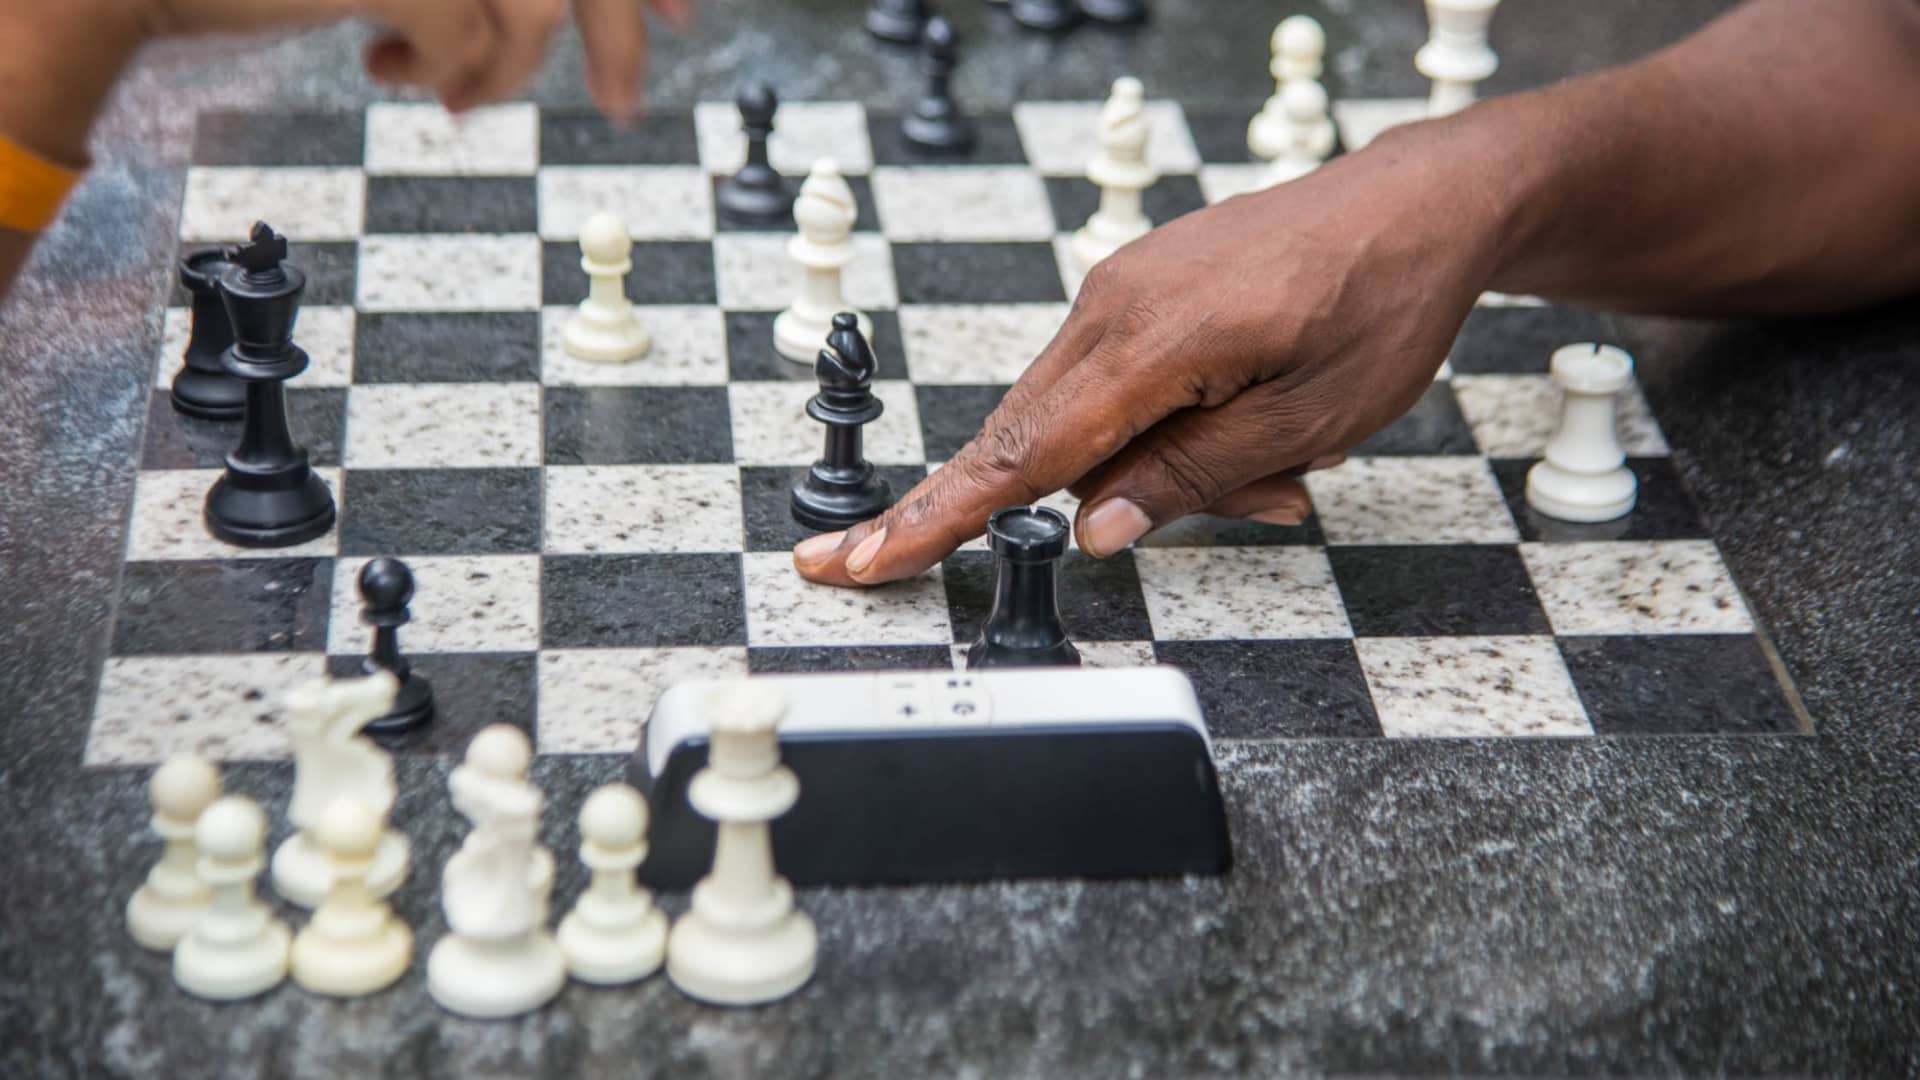 This is my experience playing at a chess tournament 2019. You will